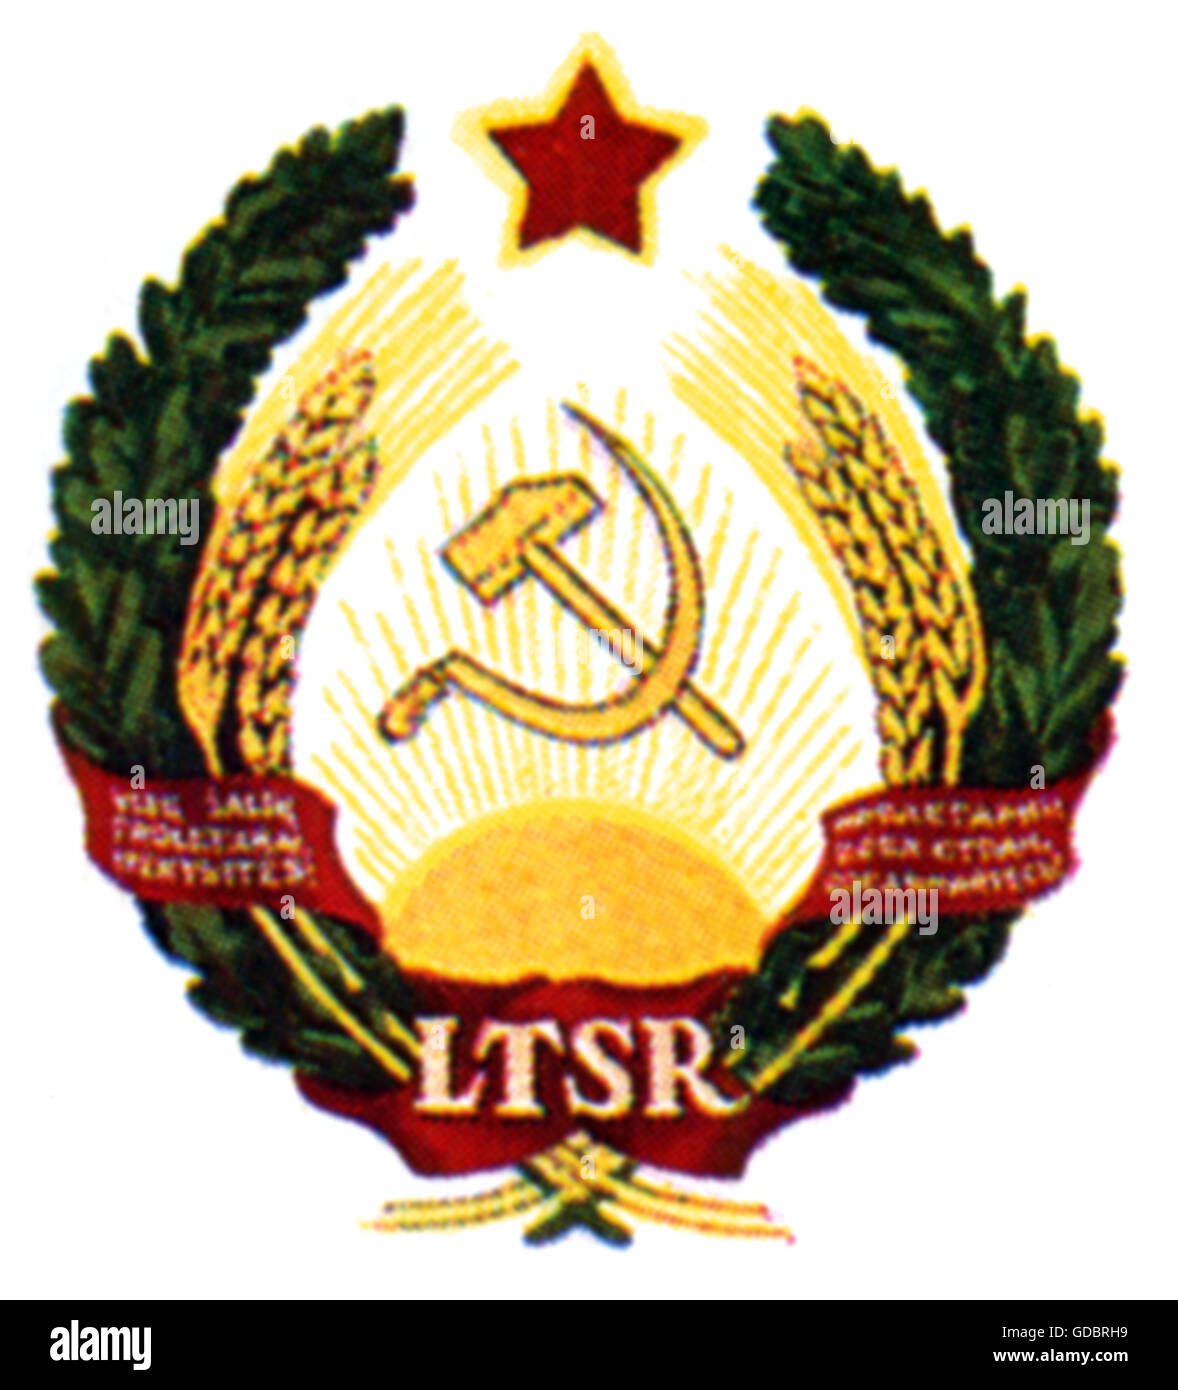 heraldry, coat of arms, Lithuania, state coat of arms of the Lithuanian Soviet Socialist Republic (AsSSR), 1940 - 1991, Additional-Rights-Clearences-Not Available Stock Photo